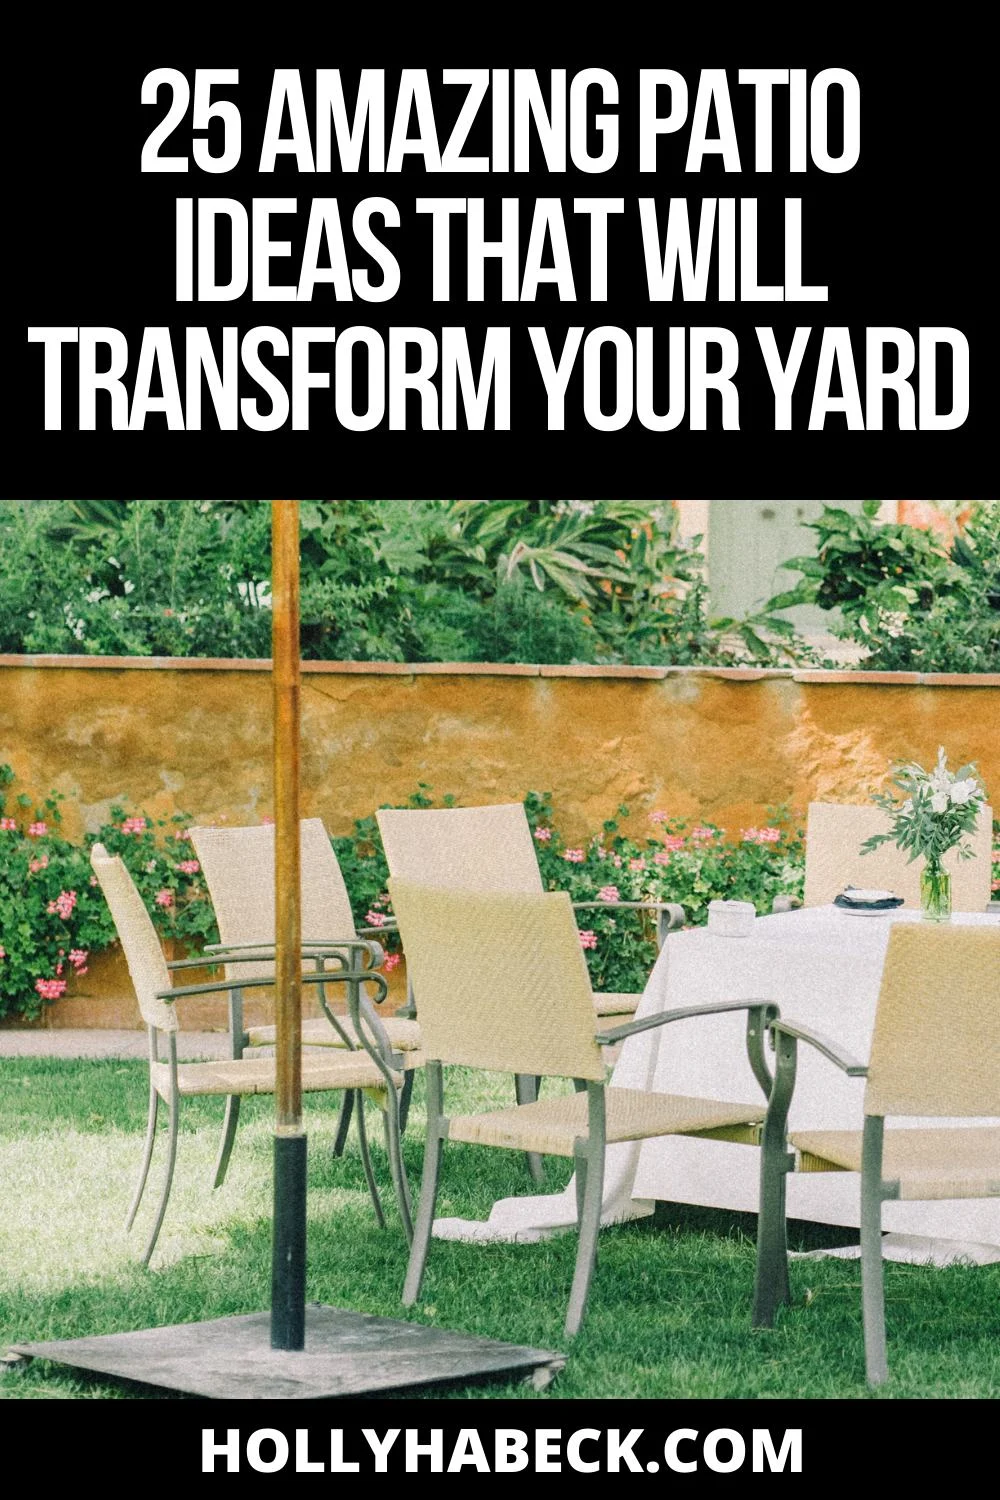 25 Amazing Patio Ideas That Will Transform Your Yard